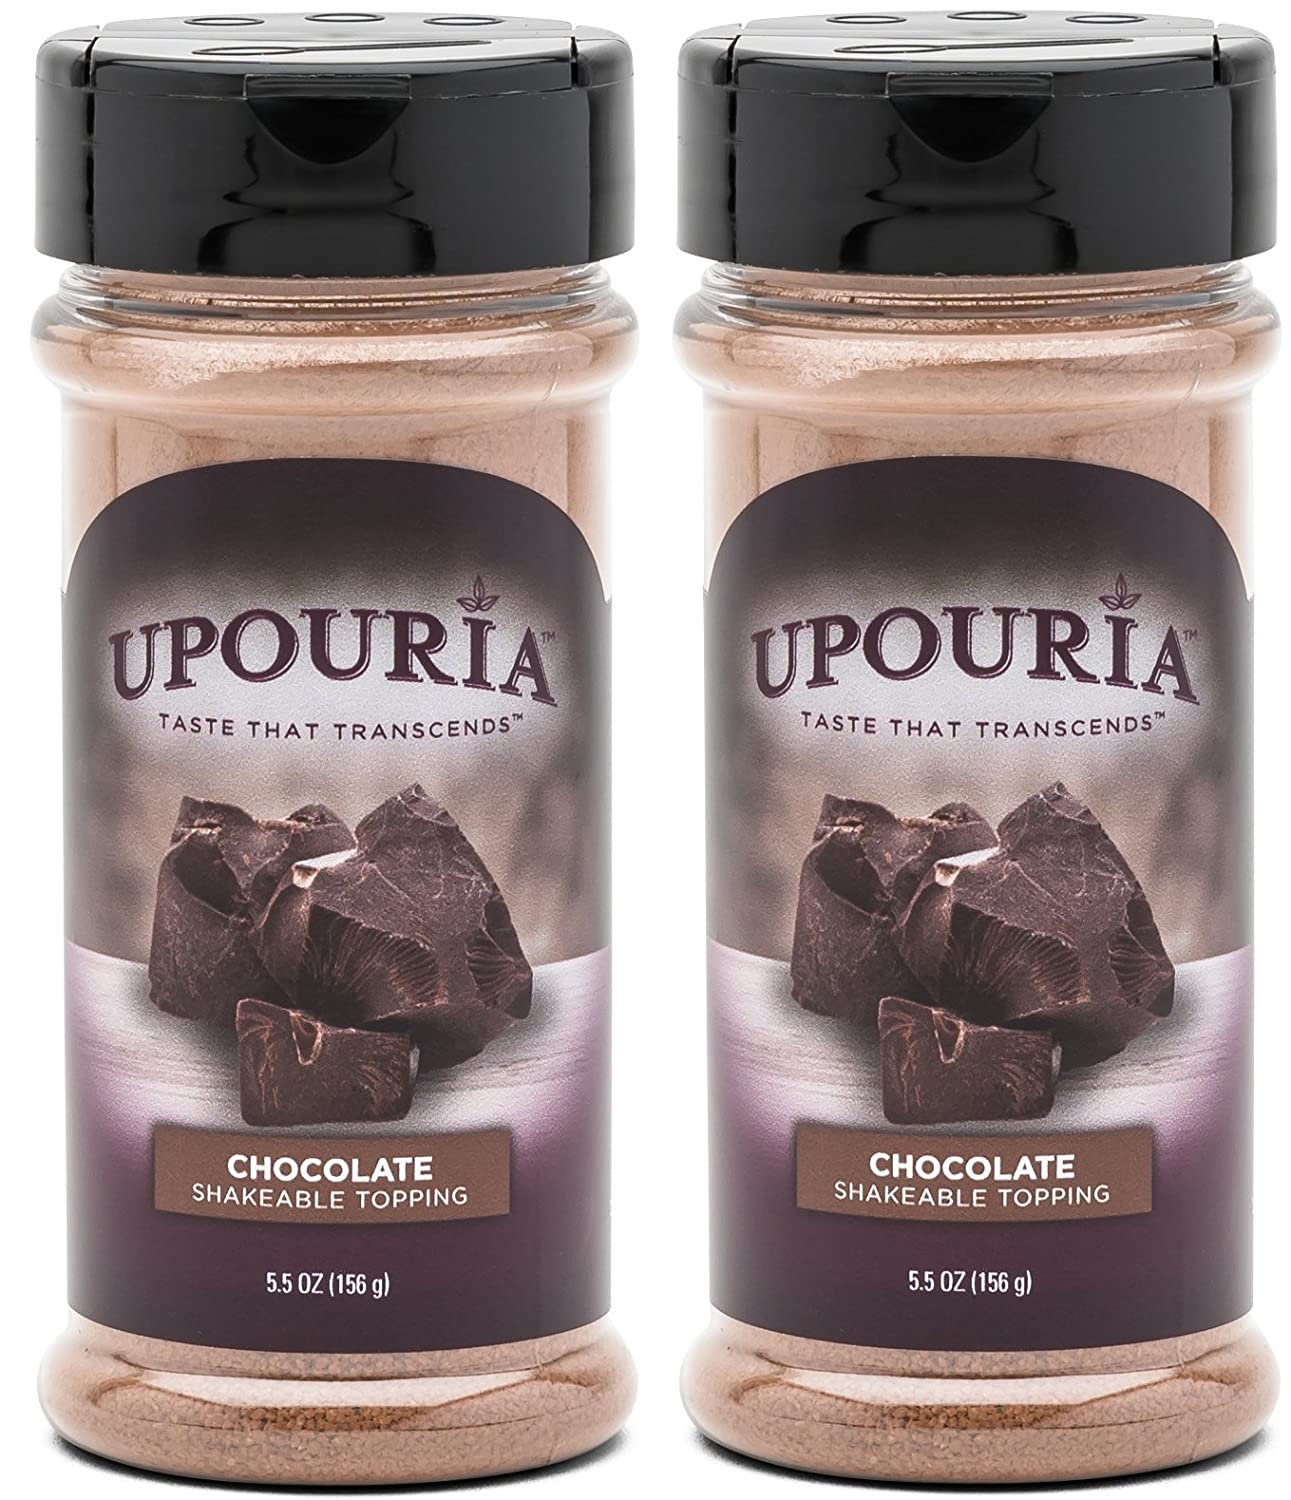 Upouria Coffee Topping Variety Pack - Chocolate and French Vanilla, 5.5  Ounce Shakeable Topping Jars - (Pack of 2)